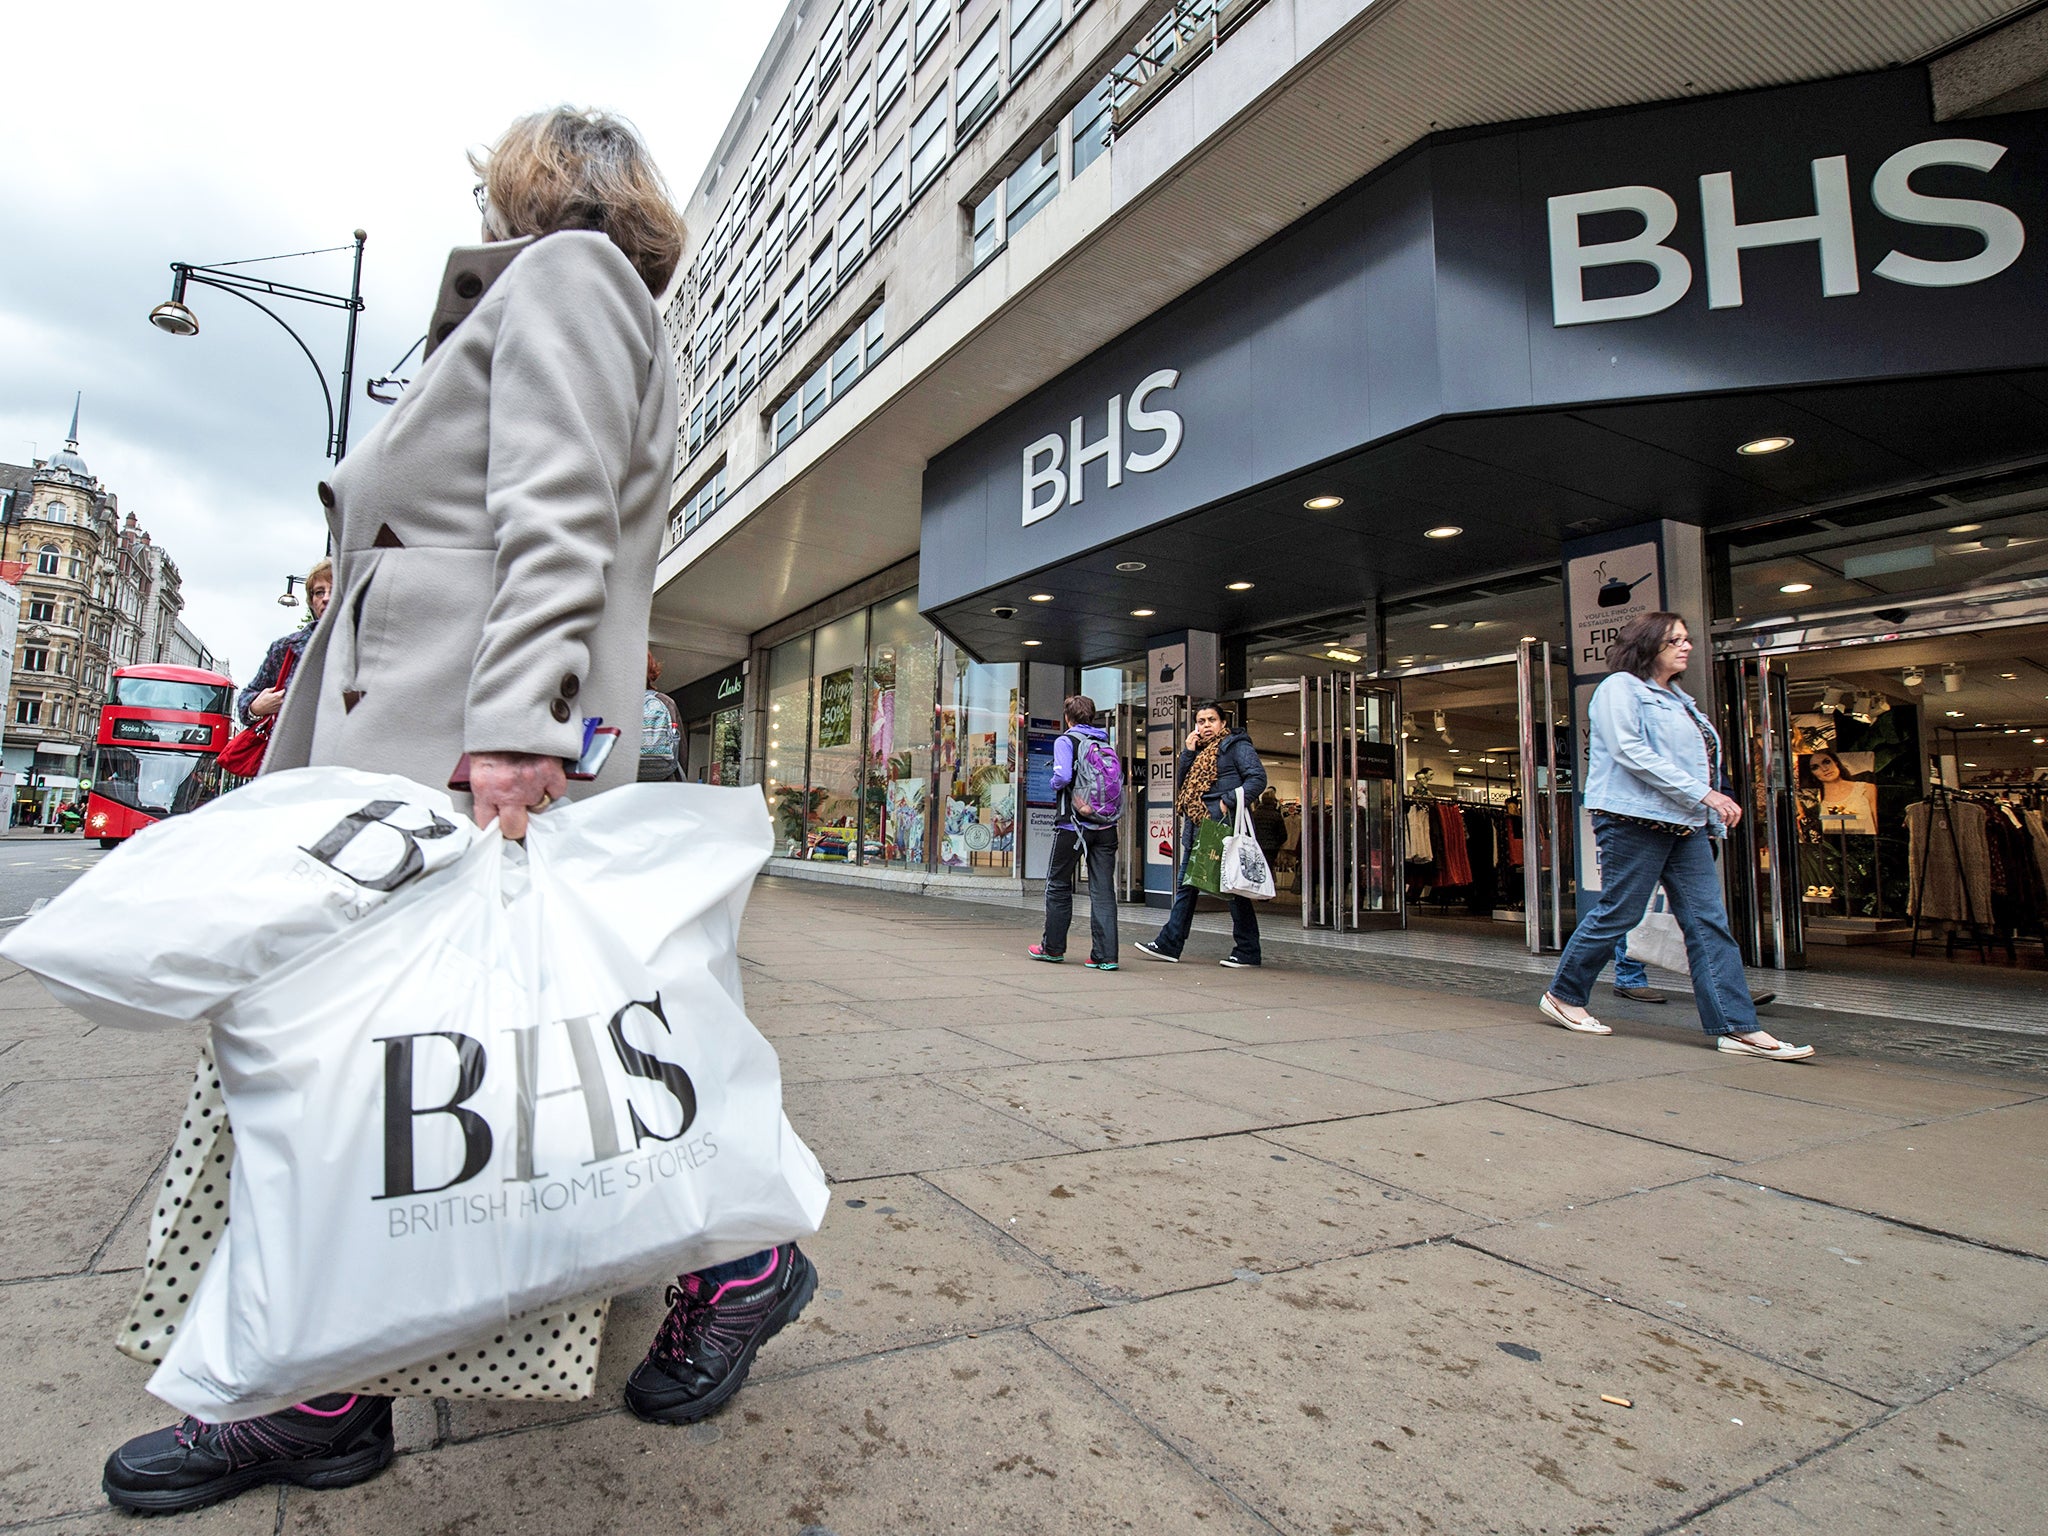 The battle to save the British high street chain BHS has ended in failure, with up to 11,000 job losses imminent